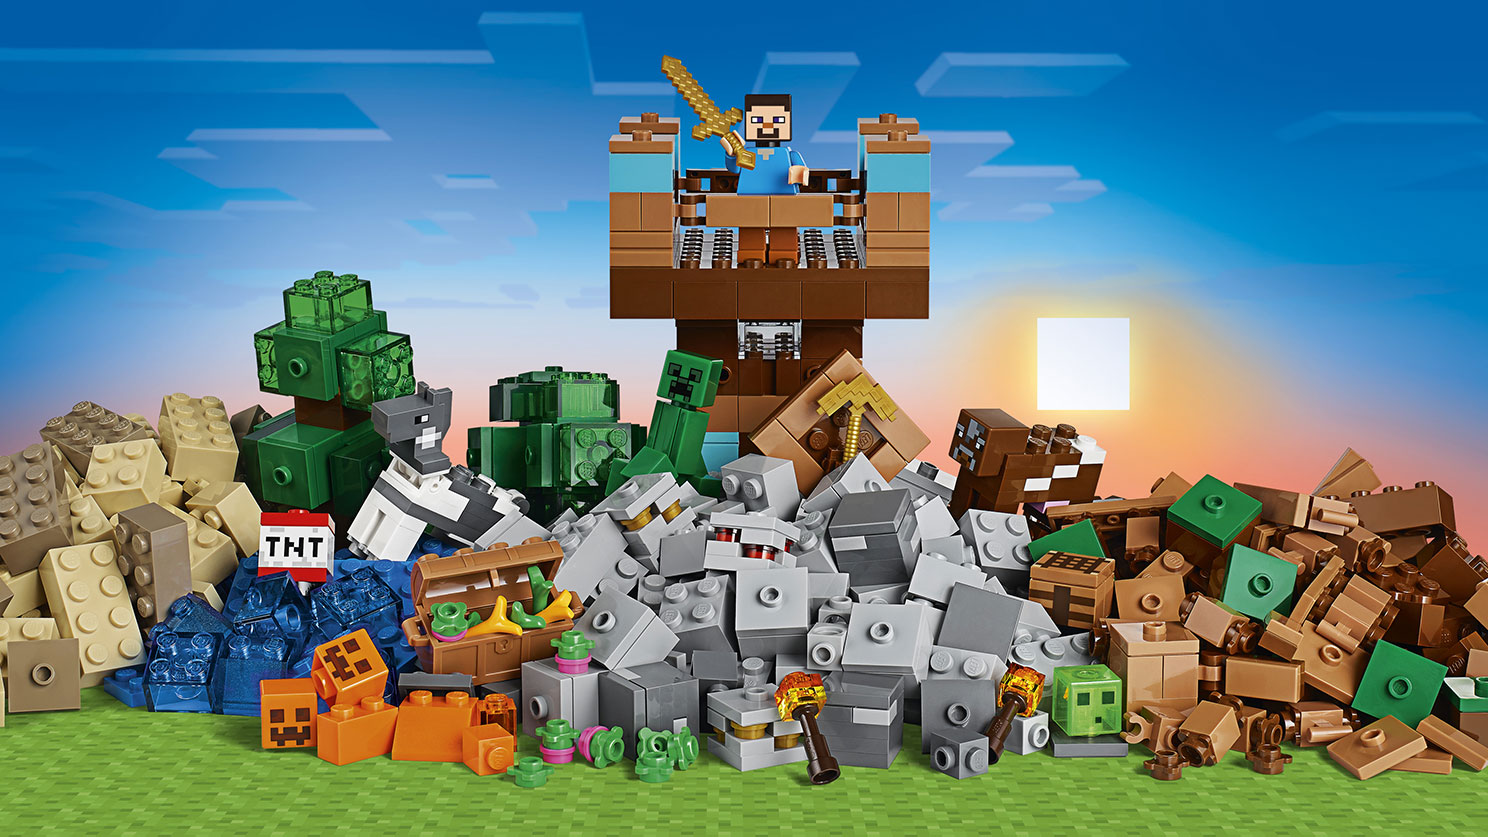 Implement overtale fup The Crafting Box 2.0 21135 - LEGO® Minecraft™ Sets - LEGO.com for kids